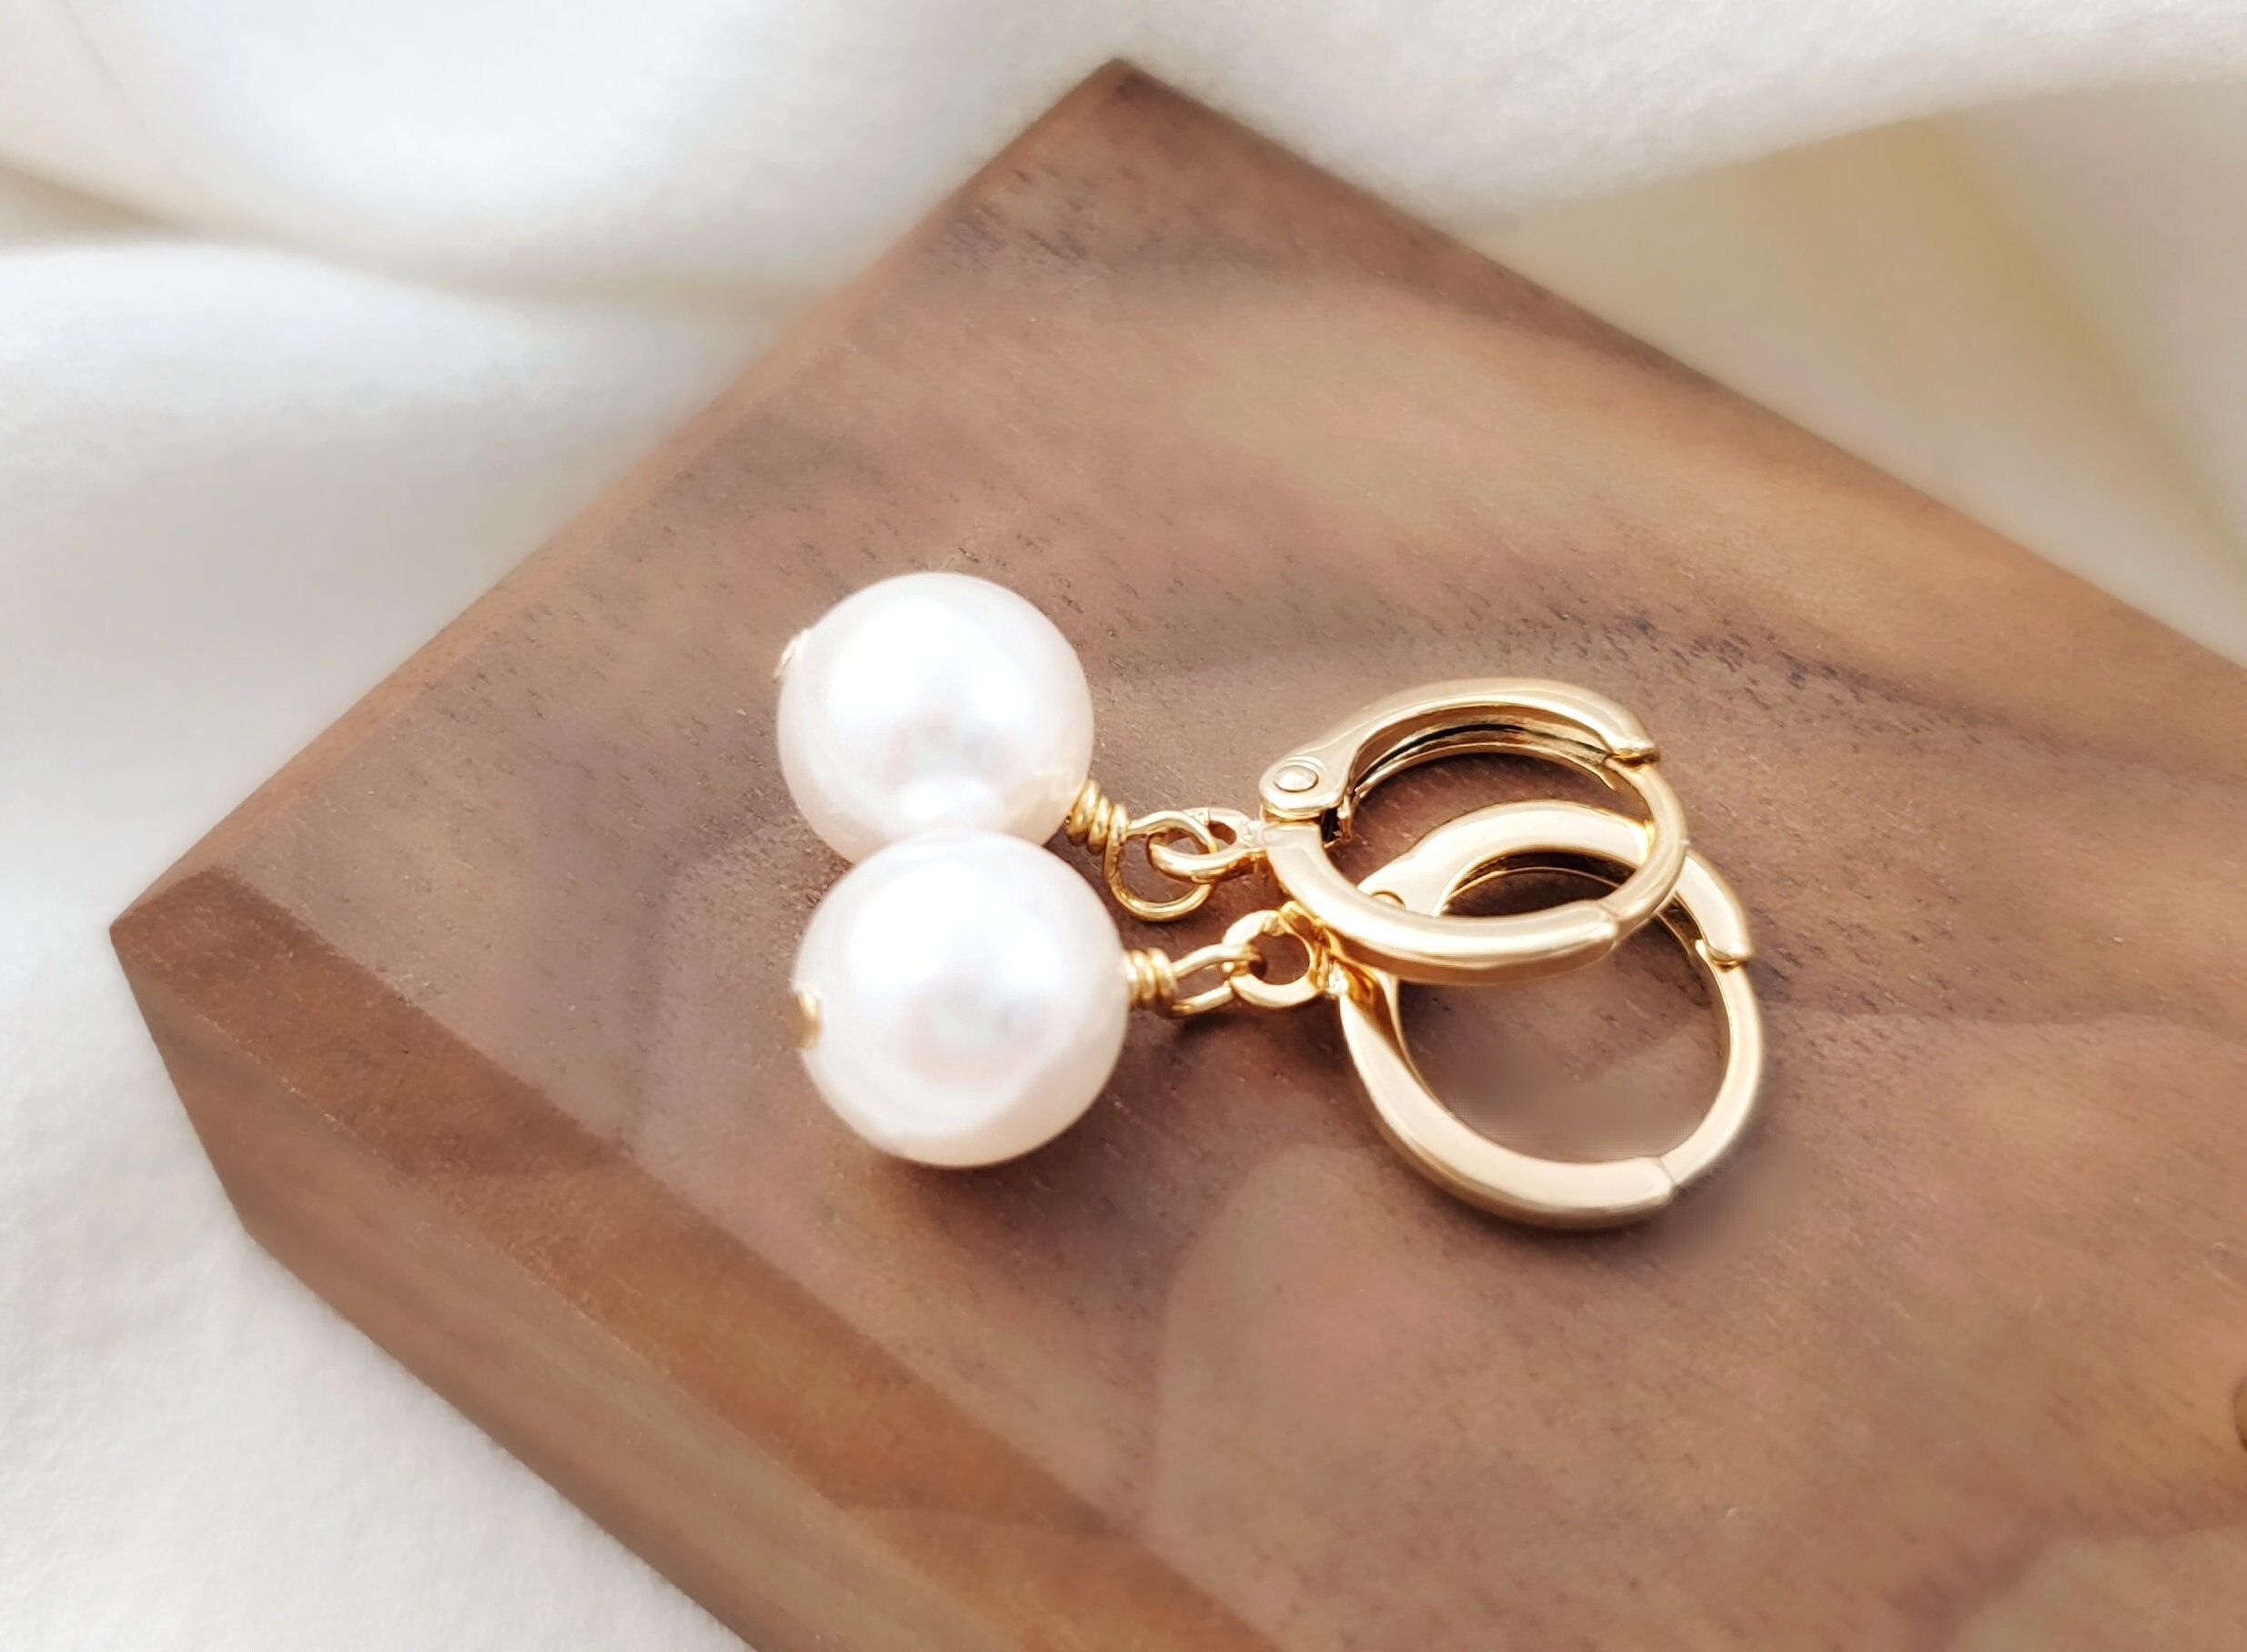 Hoop Pearl Earrings, Gold Loop Huggies with Ivory Pearl Drops, Classic 6, 7 or 8mm Round White Pearl Dangles, Small Pearl Bridal Gift E5575